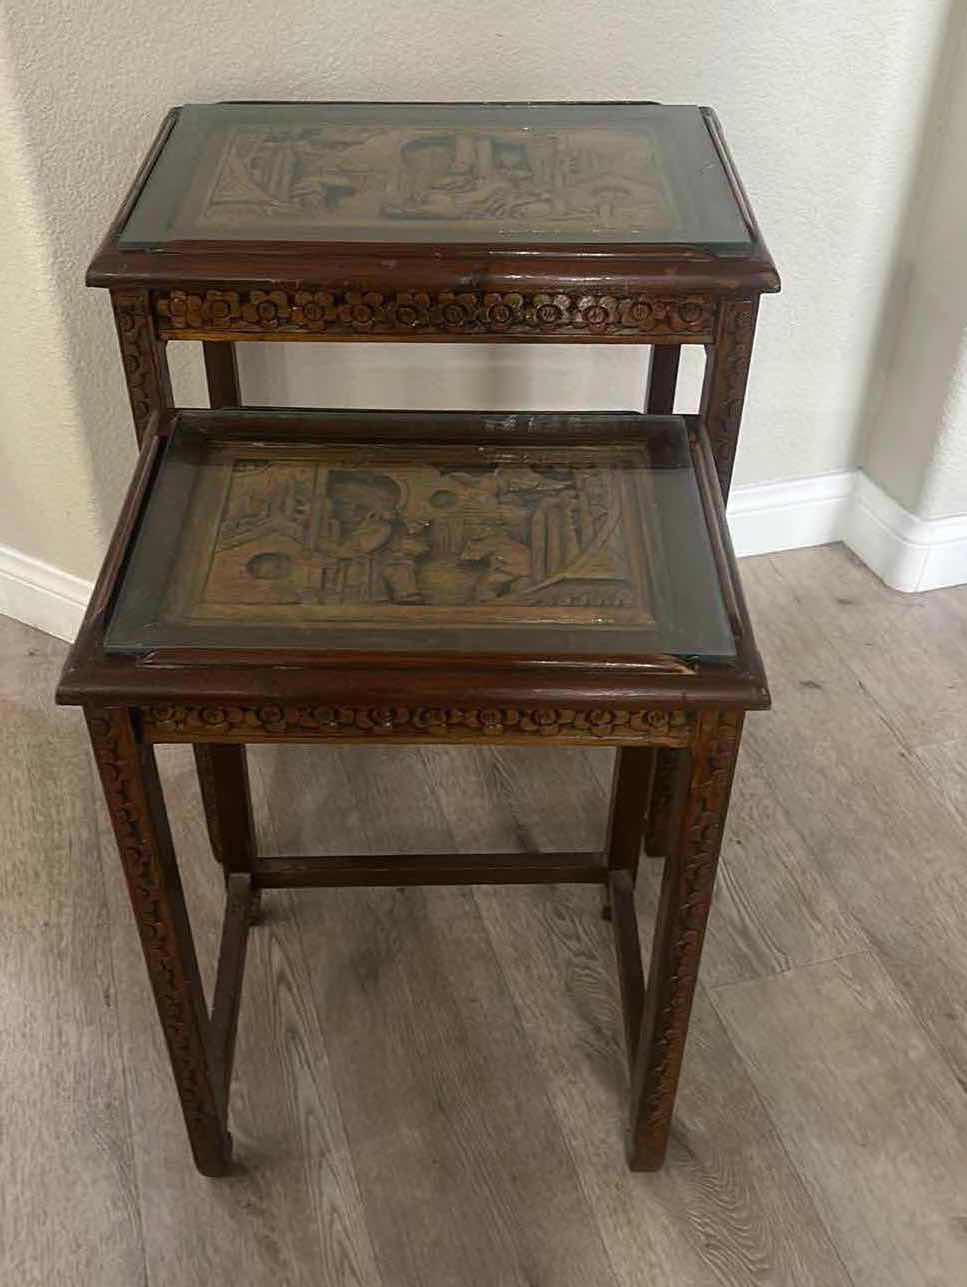 Photo 1 of 2 VINTAGE CARVED WOOD ASIAN TABLES WITH GLASS INSERTS (LARGEST 20” x 14” x 26”)